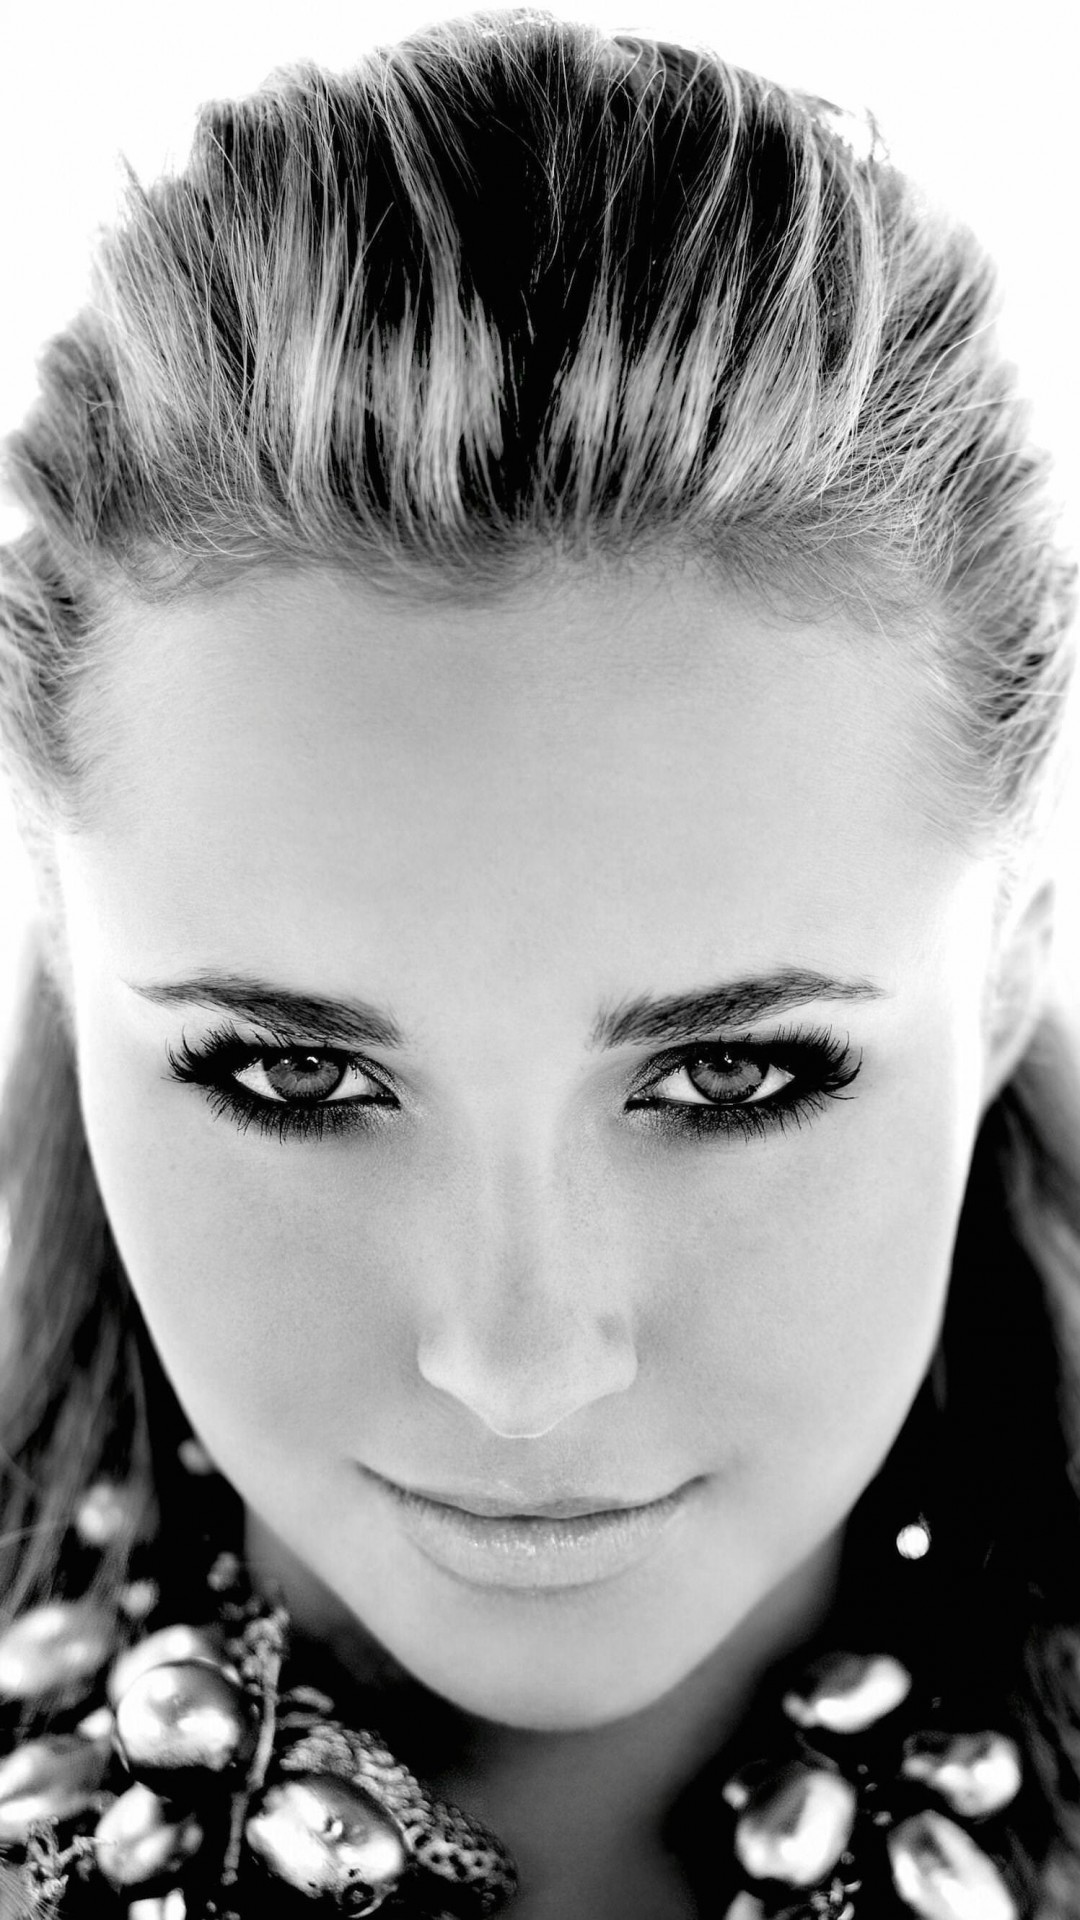 Hayden Panettiere In Black & White Wallpaper for HTC One